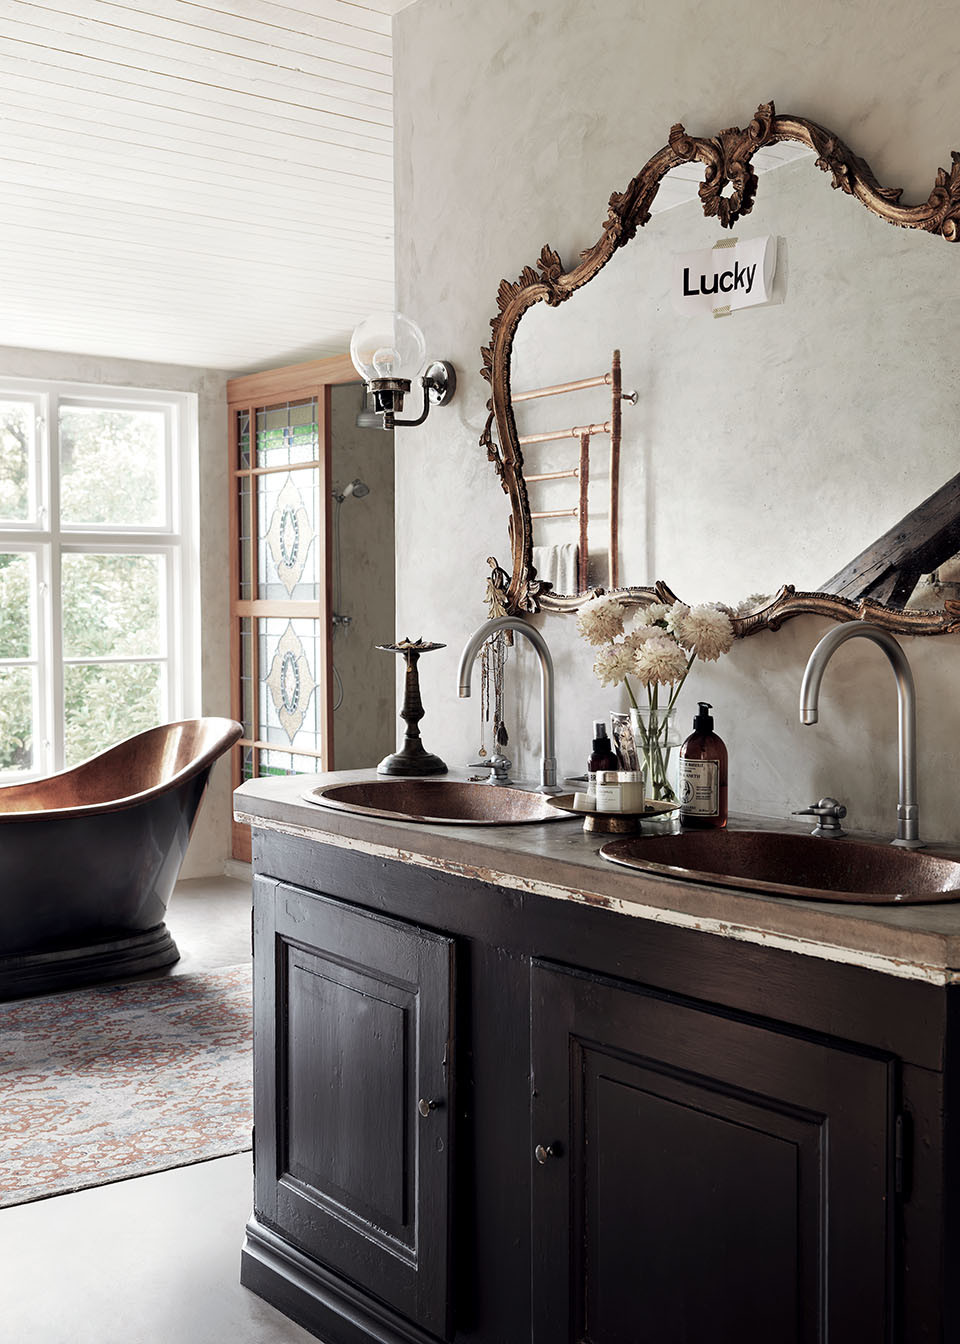 Farmhouse Style Bathroom Mirrors
 Top 10 Most Gorgeous Living Spaces Featuring STUNNING